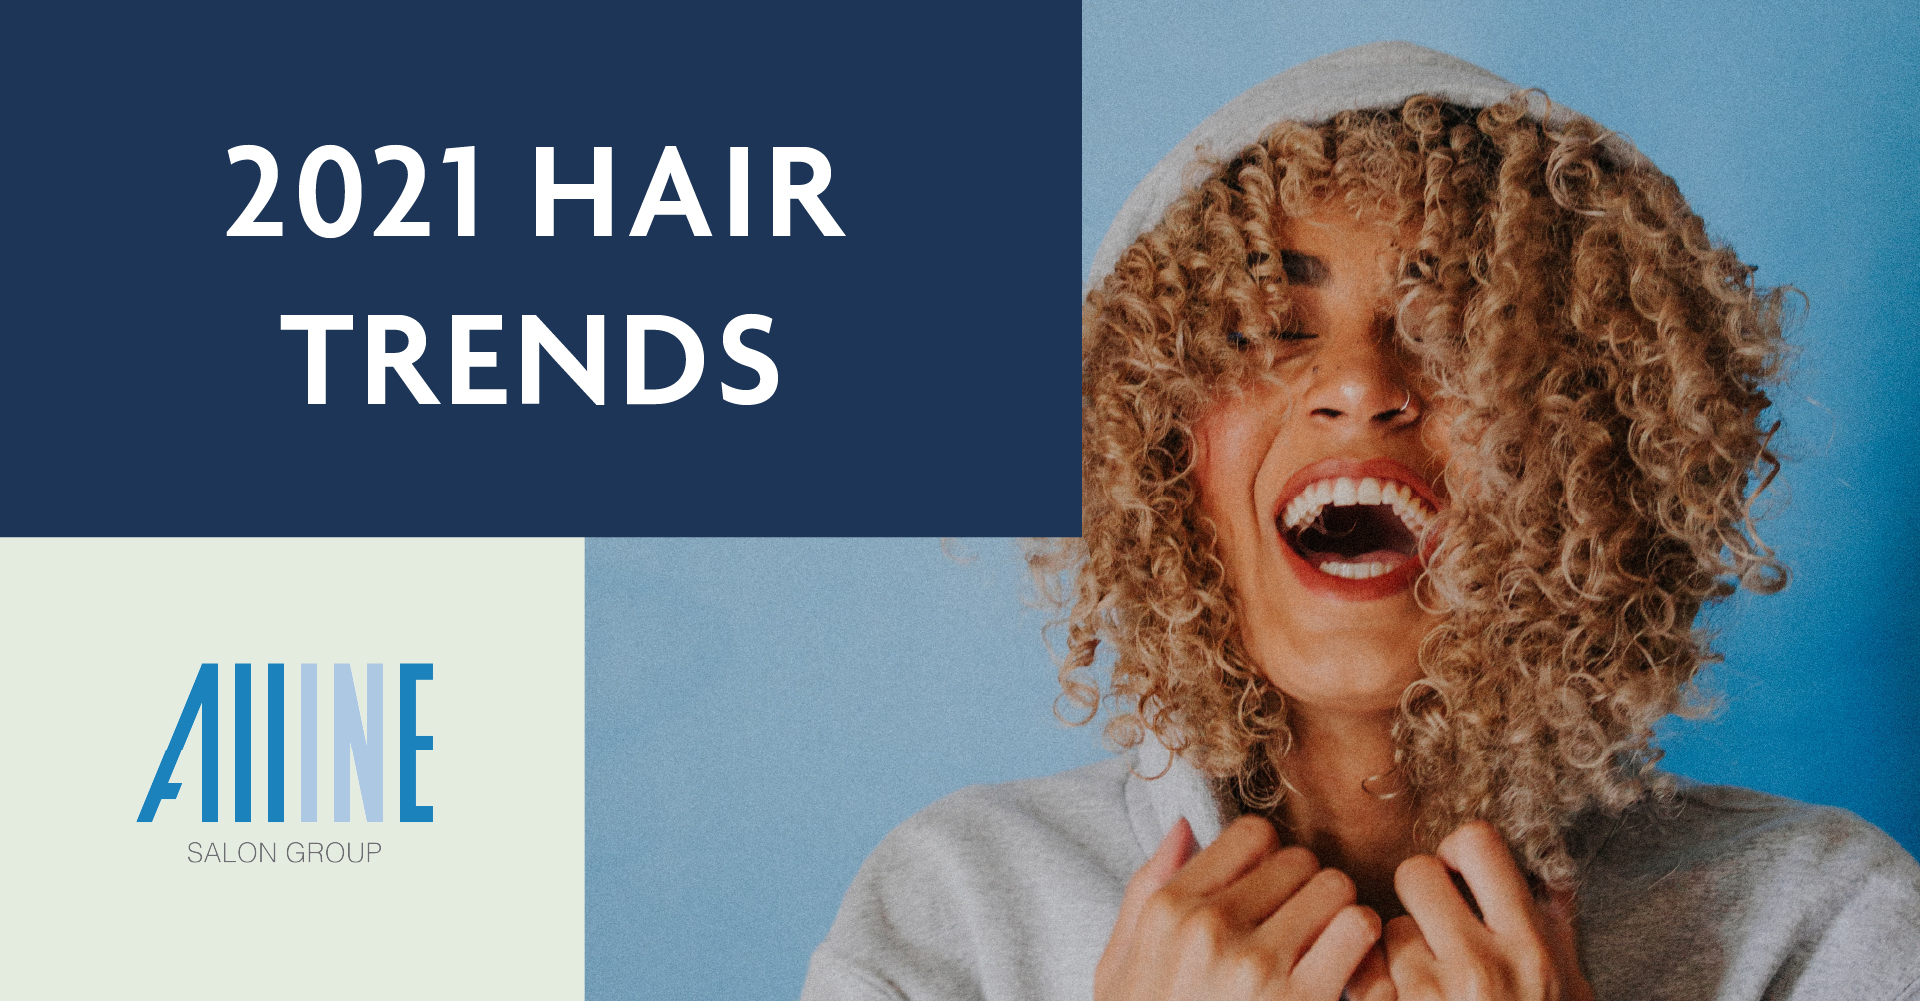 1. "Blonde Balayage Hair Trends for 2021" - wide 3